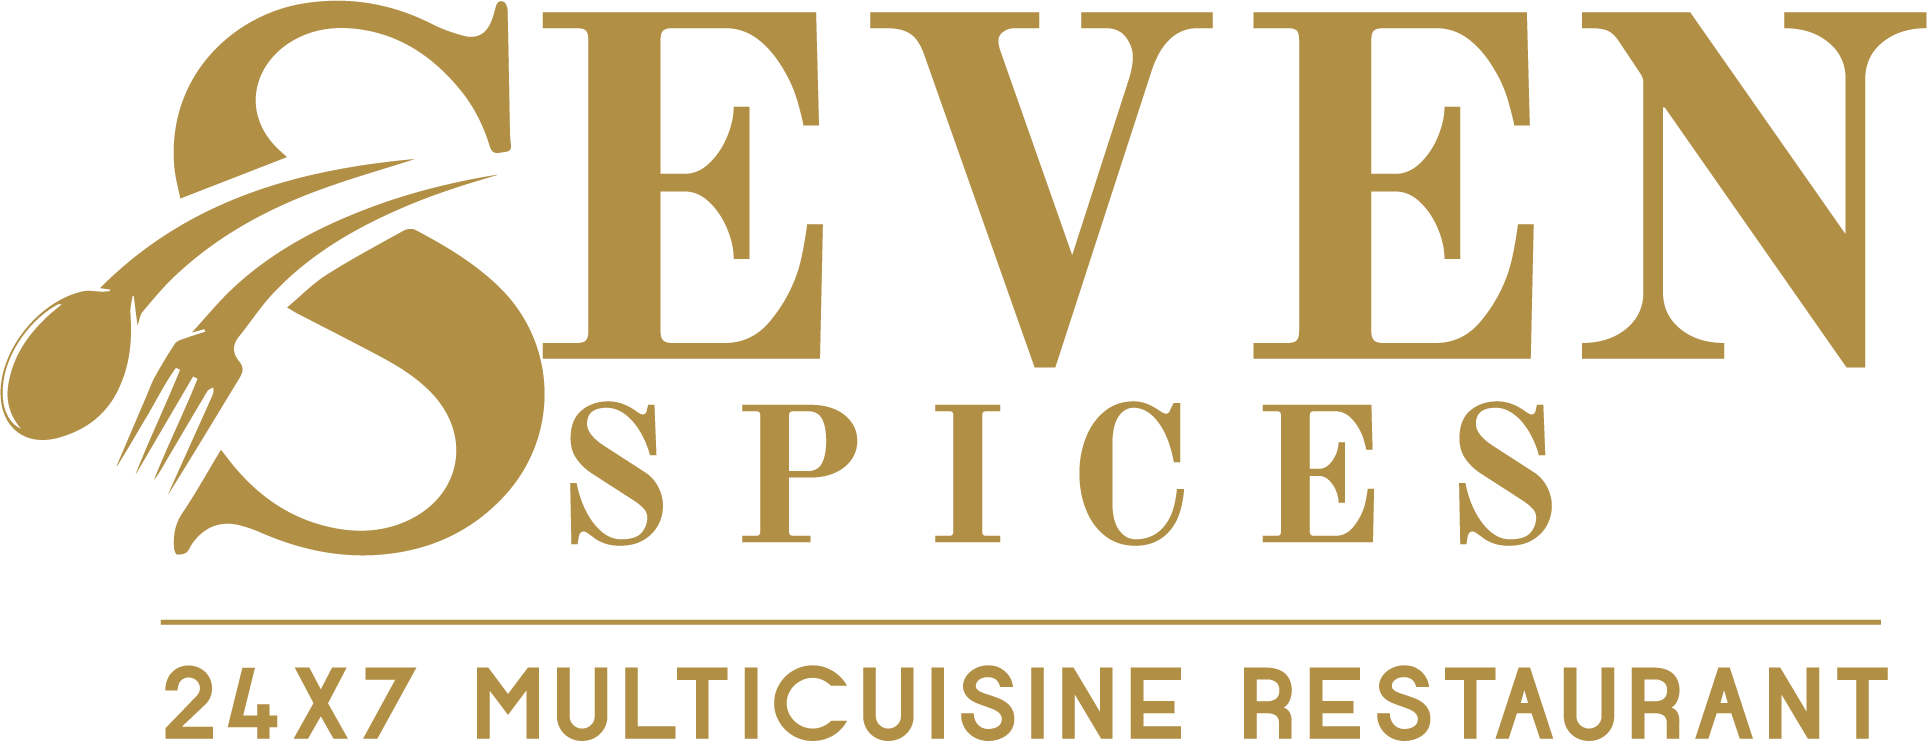 Sevent Spices